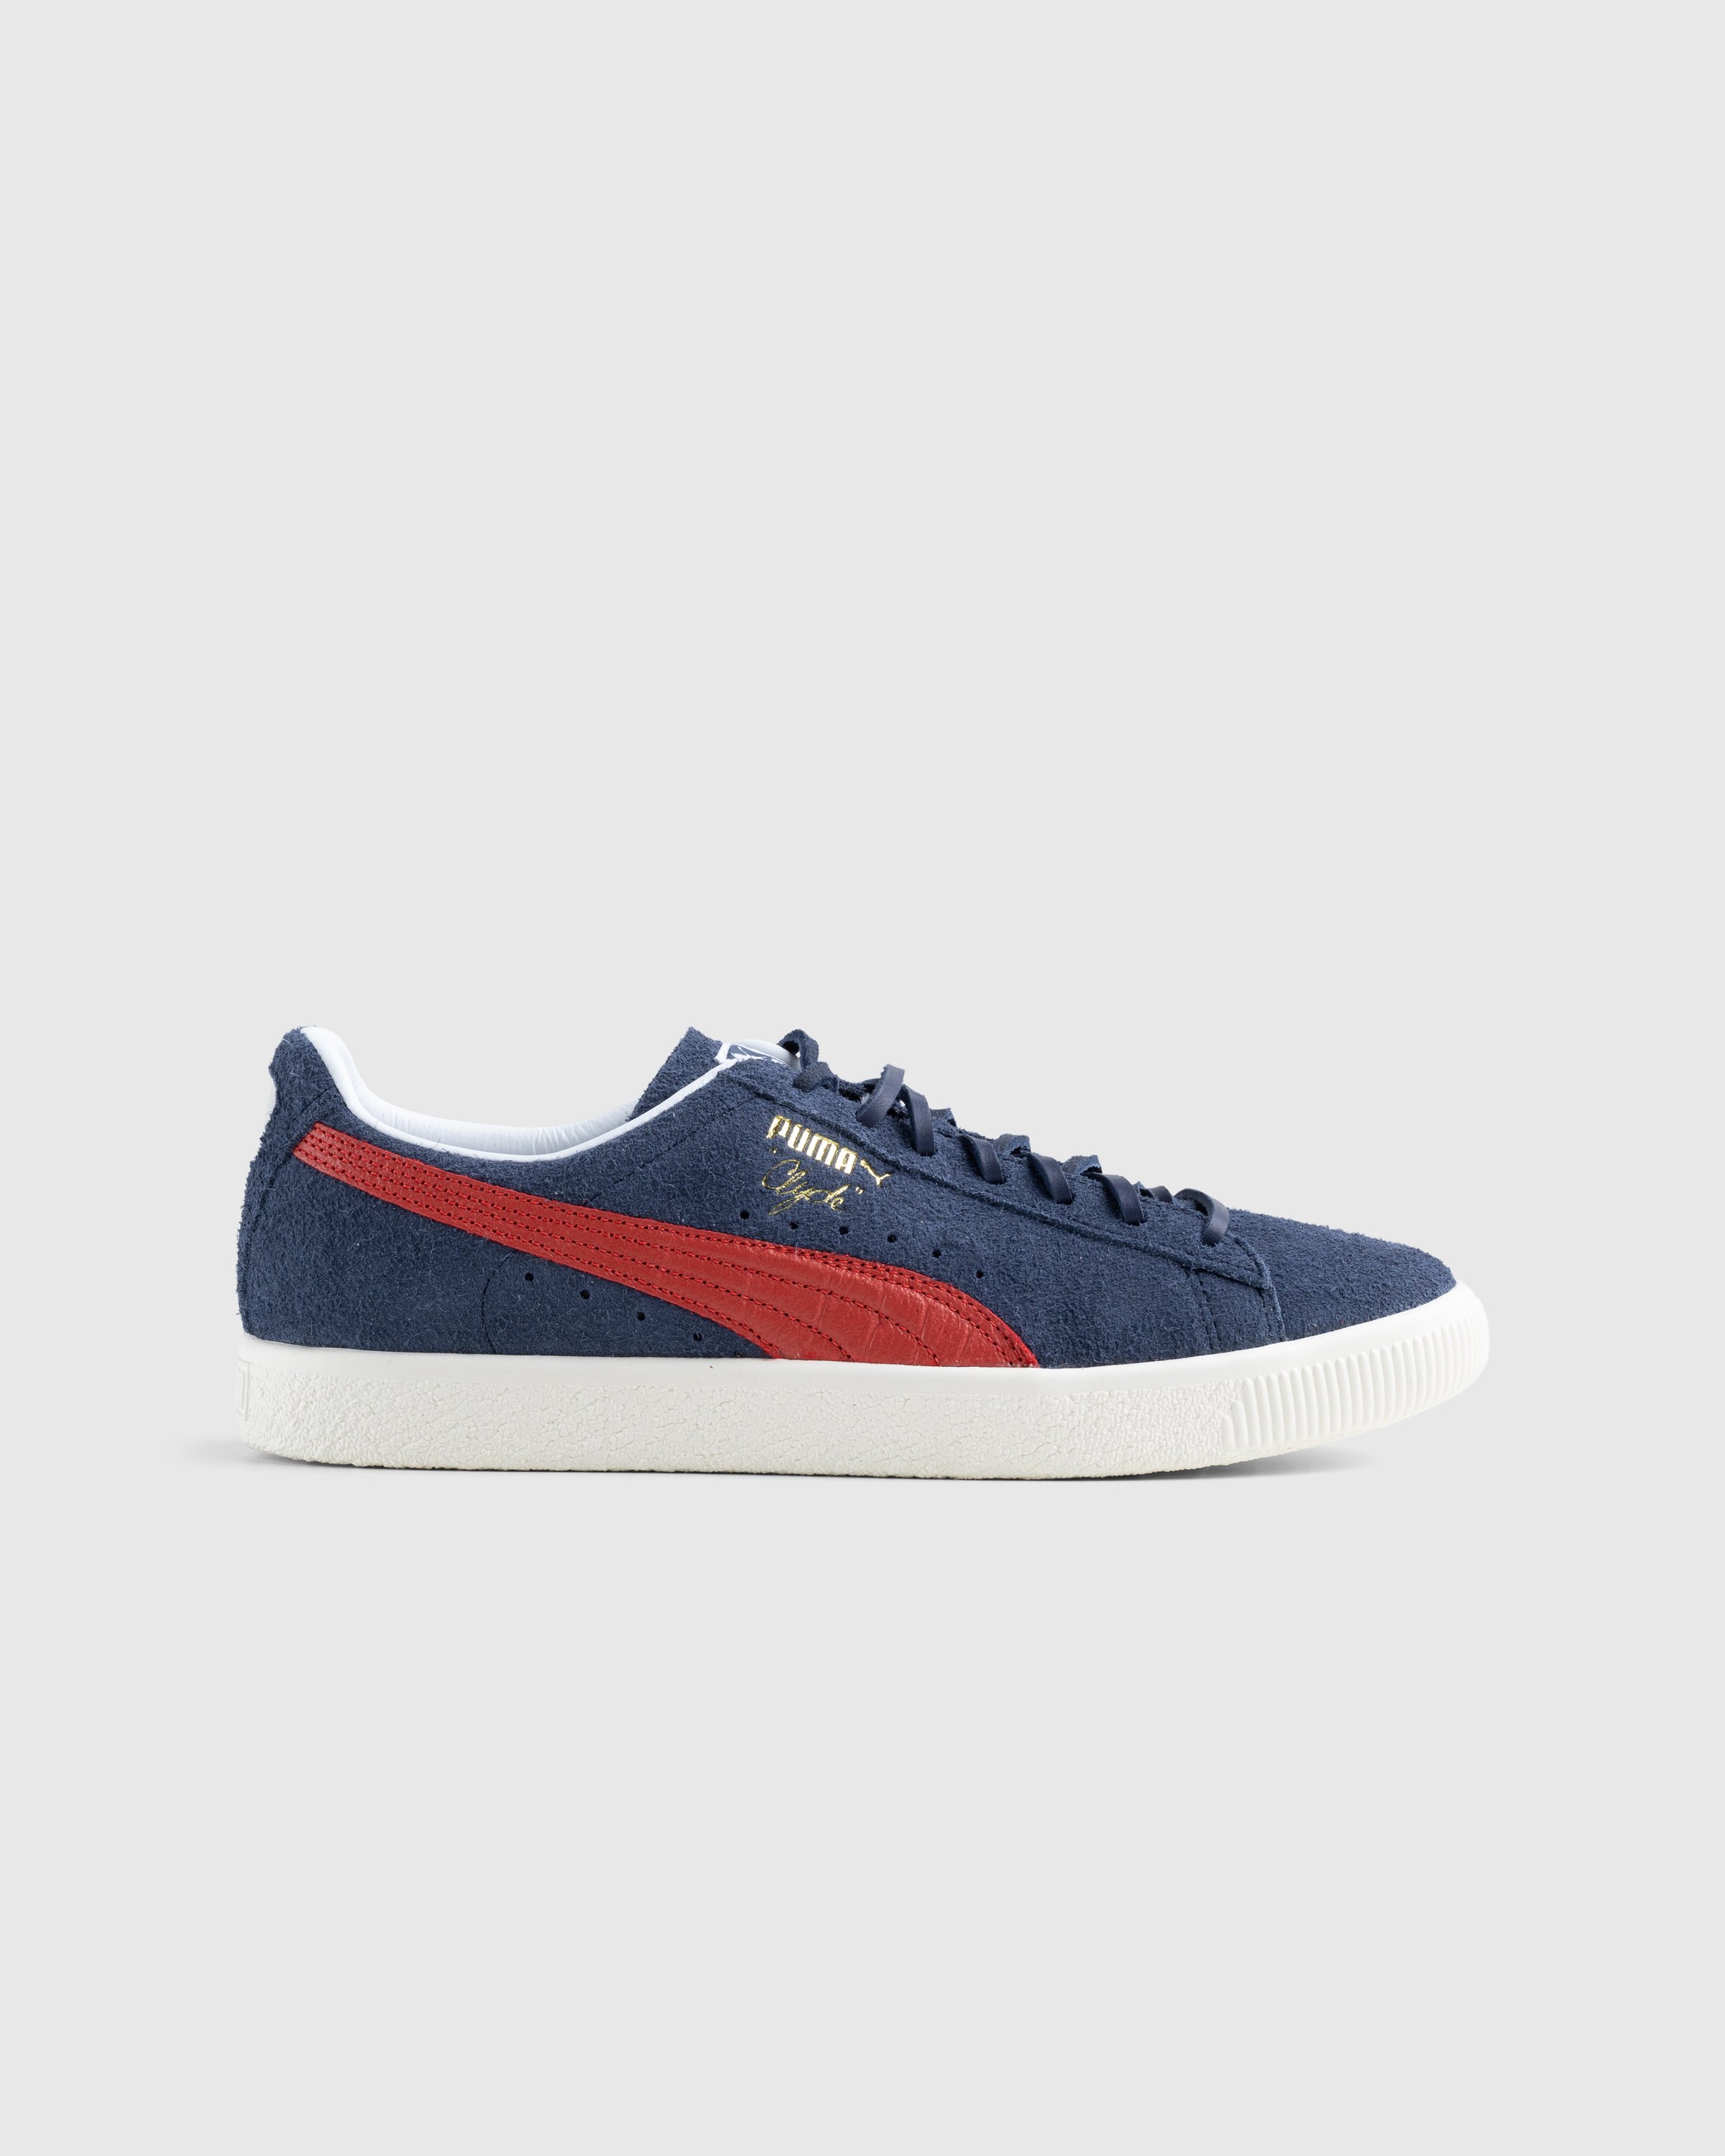 Puma - Clyde Soho London Frosted Ivory/New Navy - Footwear - Beige - Image 1